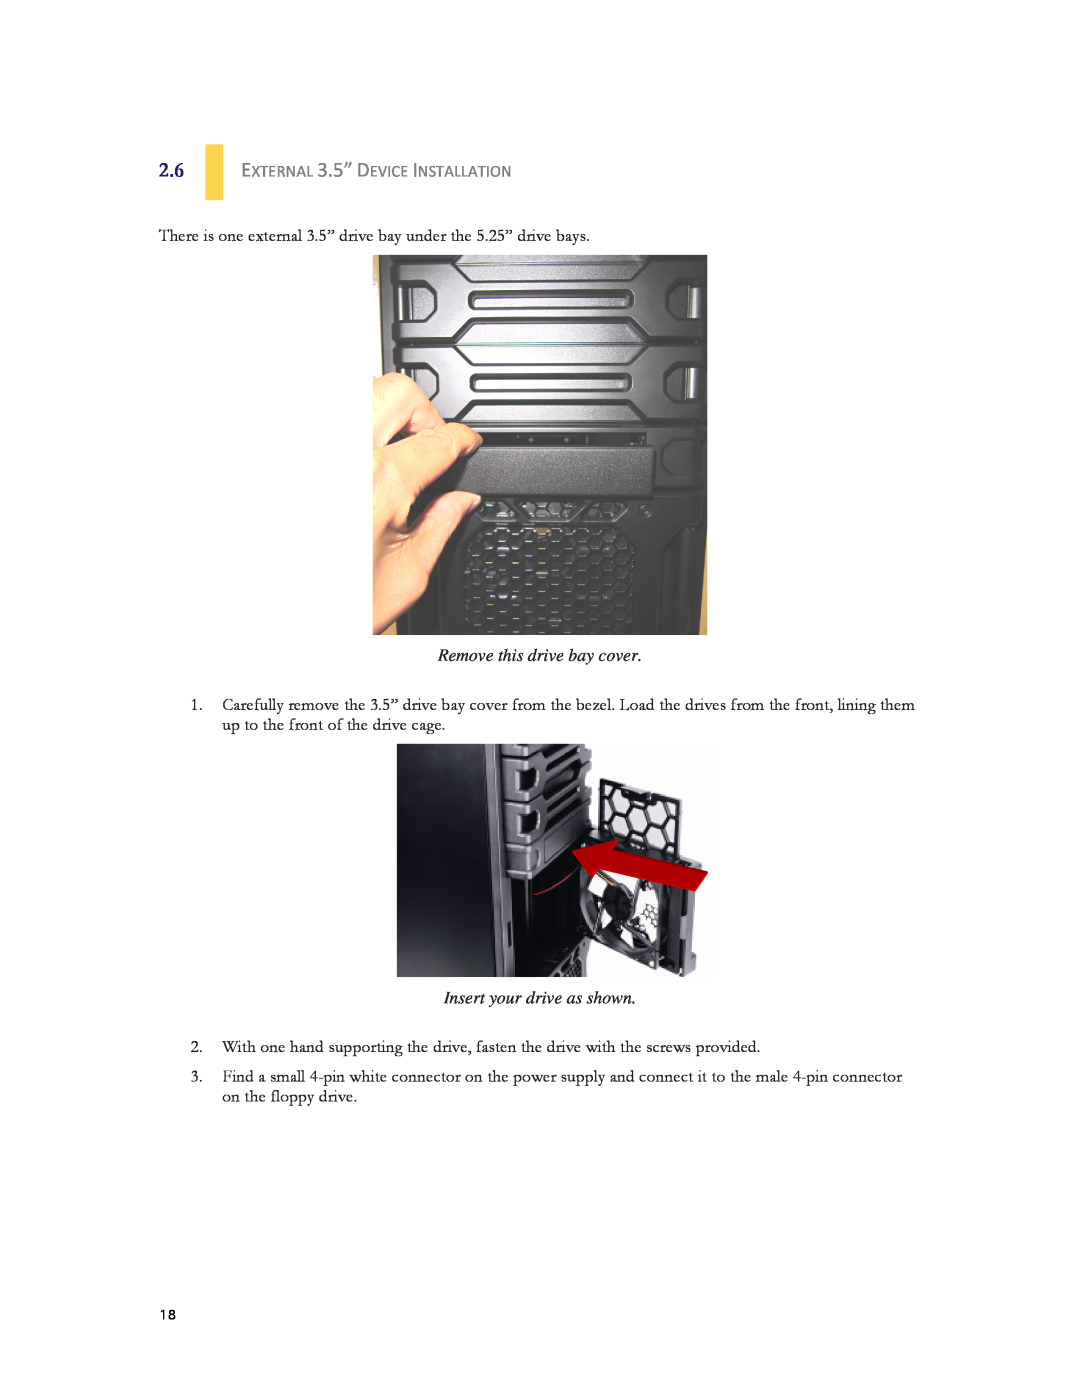 Antec DF-30 user manual EXTERNAL 3.5” DEVICE INSTALLATION, There is one external 3.5” drive bay under the 5.25” drive bays 